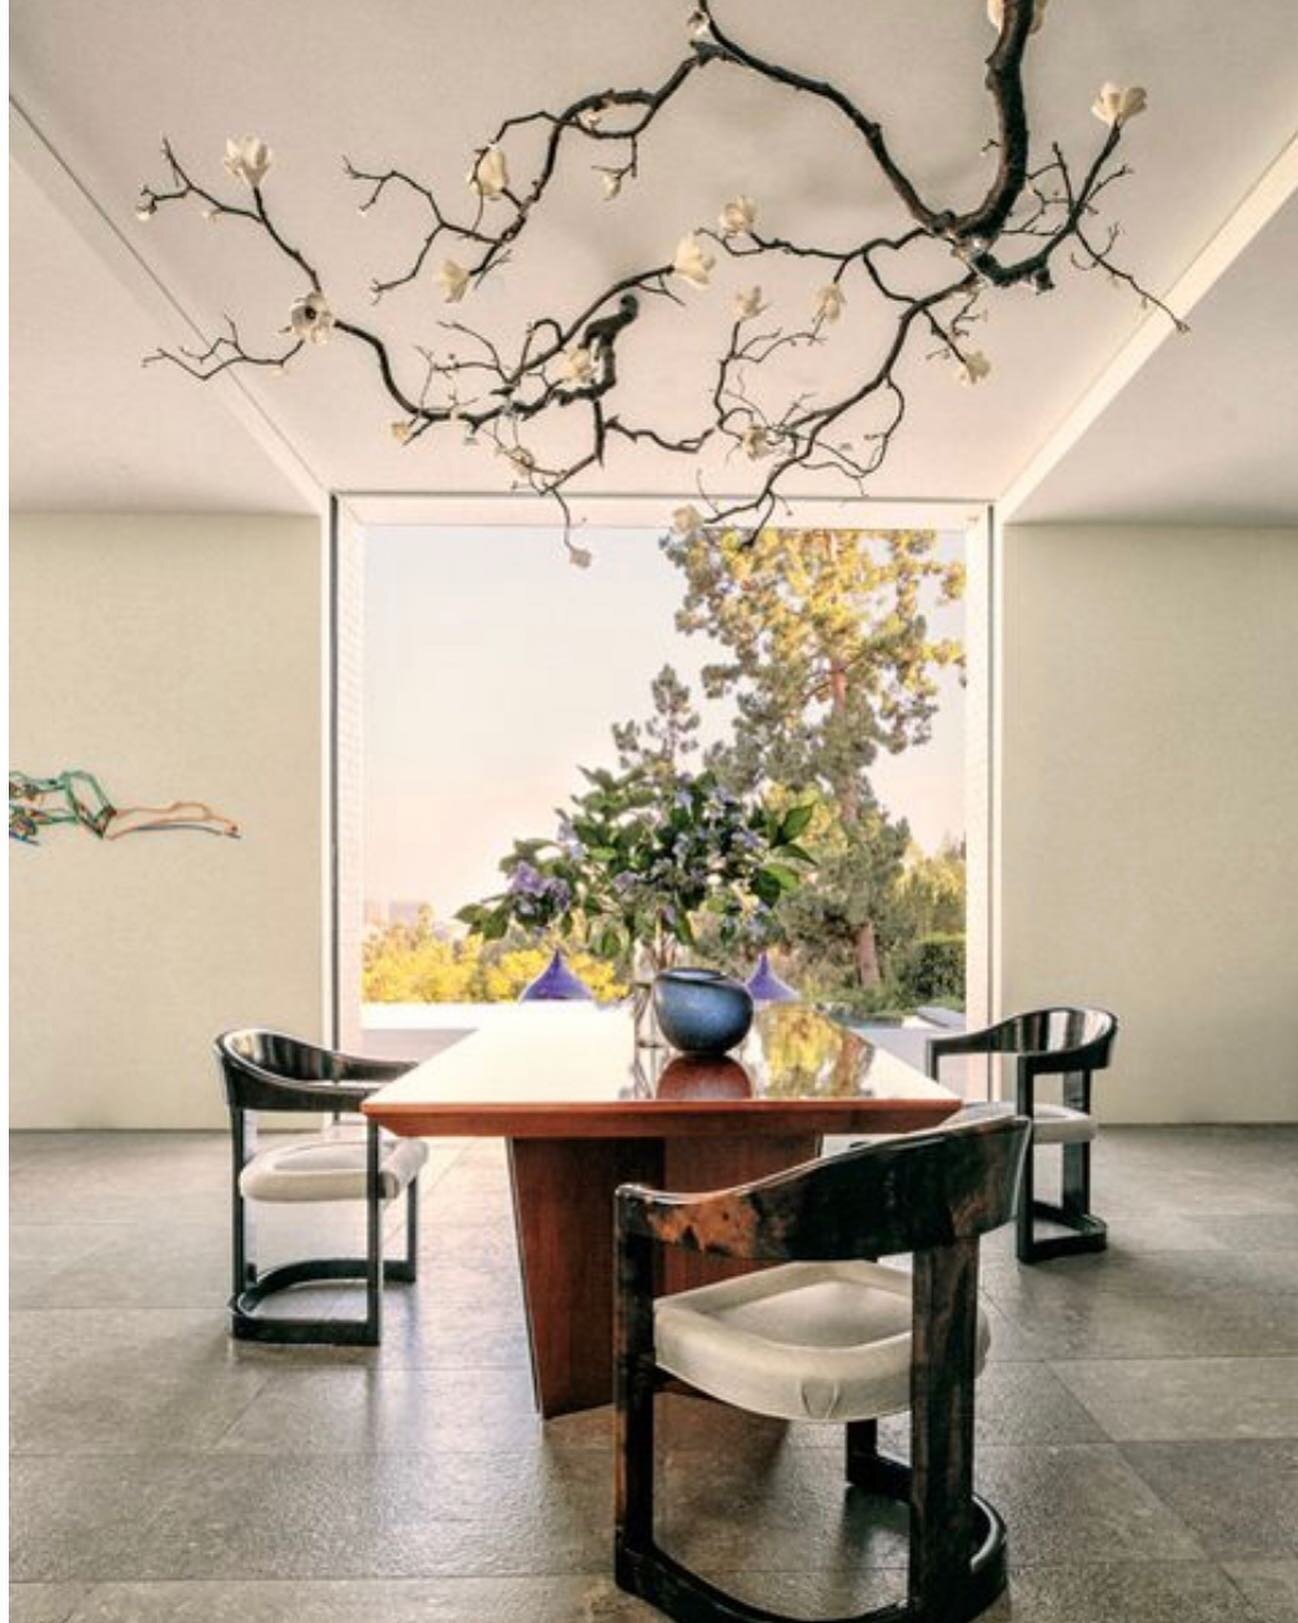 The organic contours of this statement bronze and ceramic light fixture by David Wiseman above the Vladimir Kagan dining table and Karl Springer dining chairs perfectly complements the Tom Wesselman artwork...classic elements of mid-century splendor 